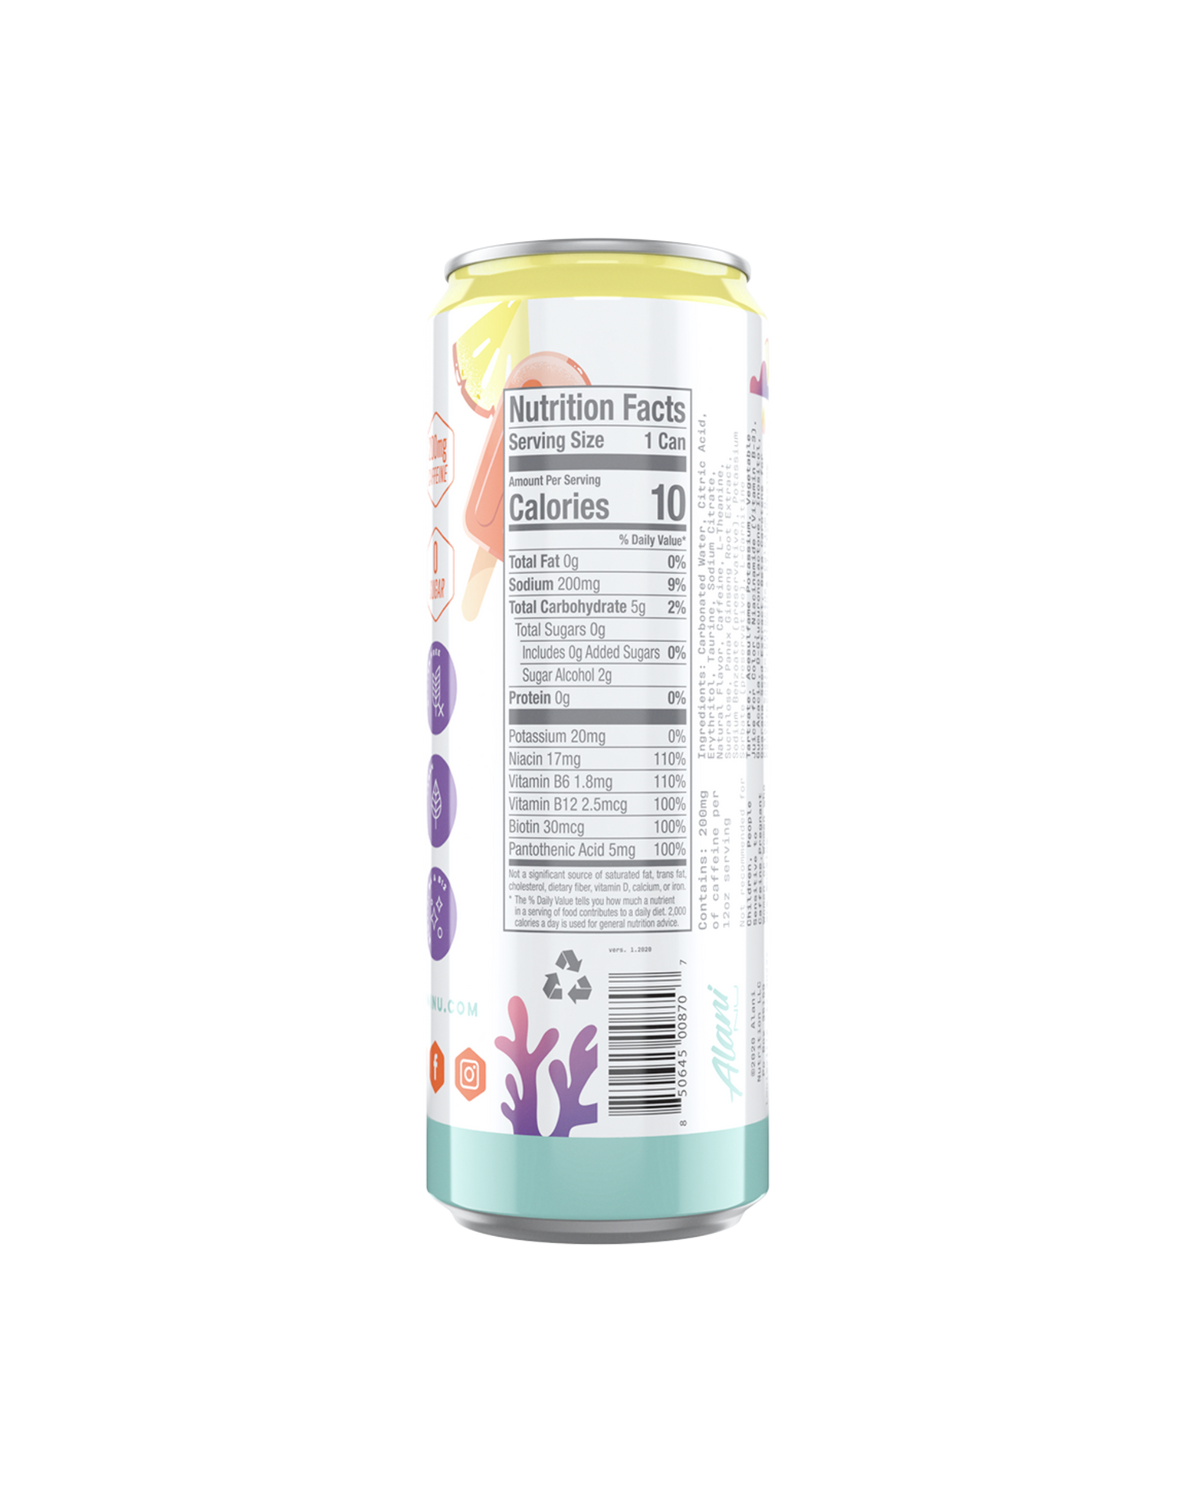 A back view of energy drink in tropsicle flavor highlighting nutrition facts.